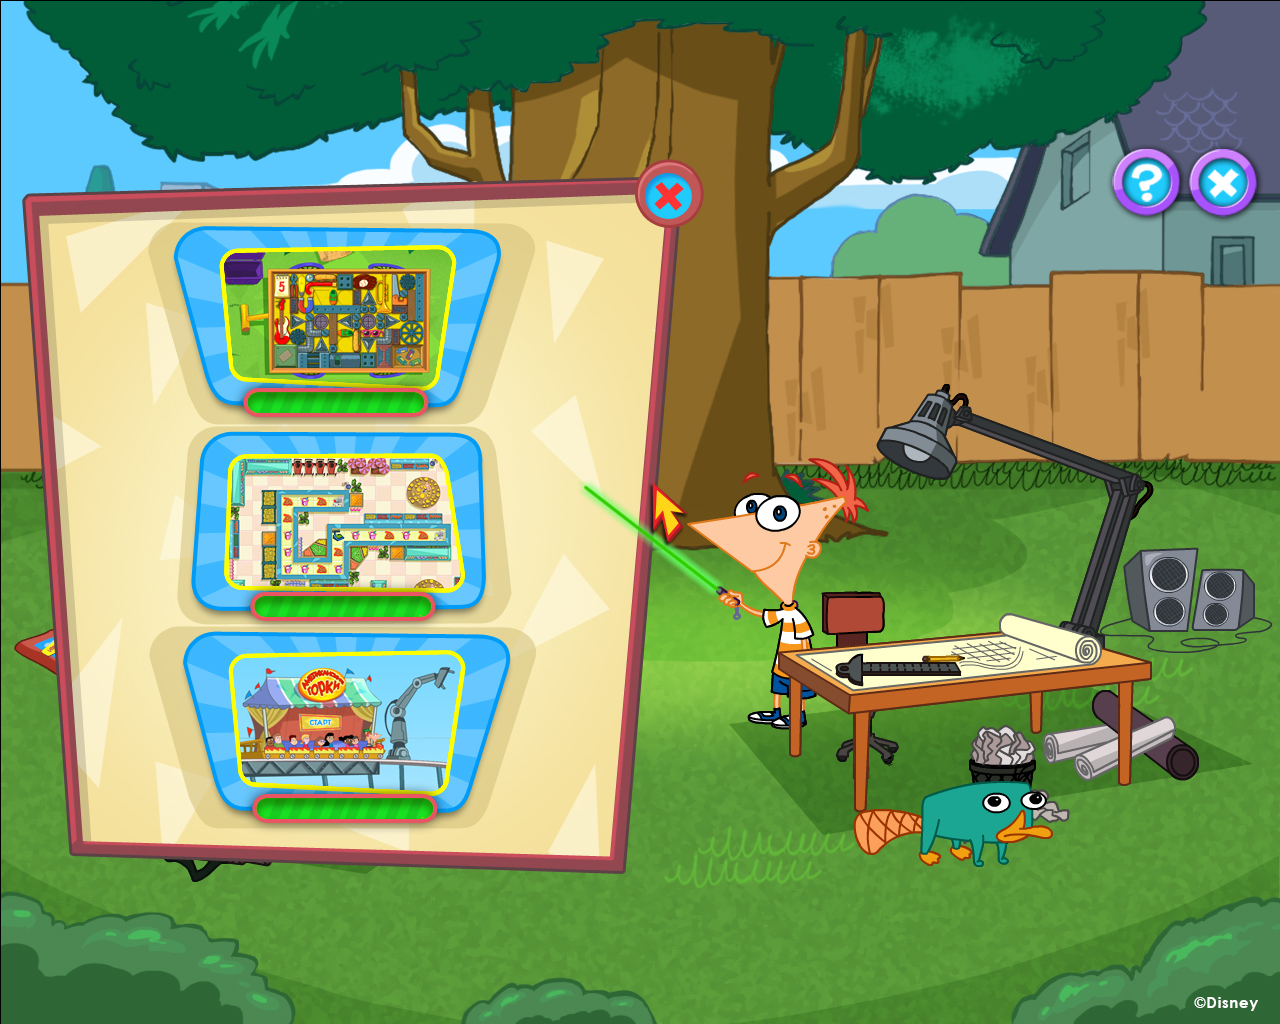 Phineas and Ferb: New Inventions screenshot